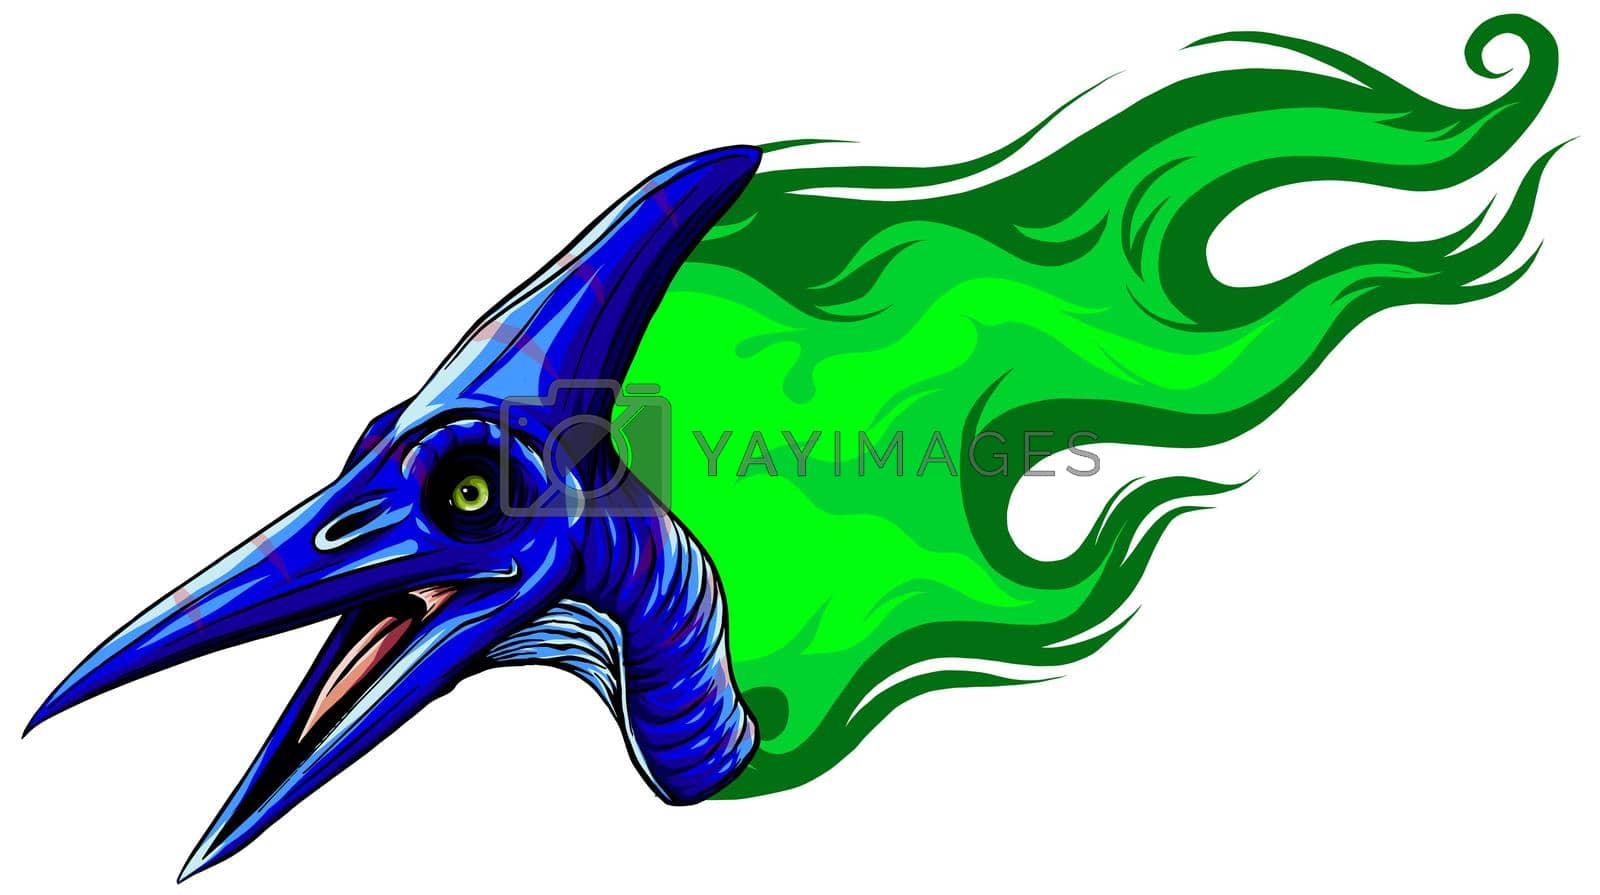 Royalty free image of Vector illustration pteranodon with flame. design art by dean